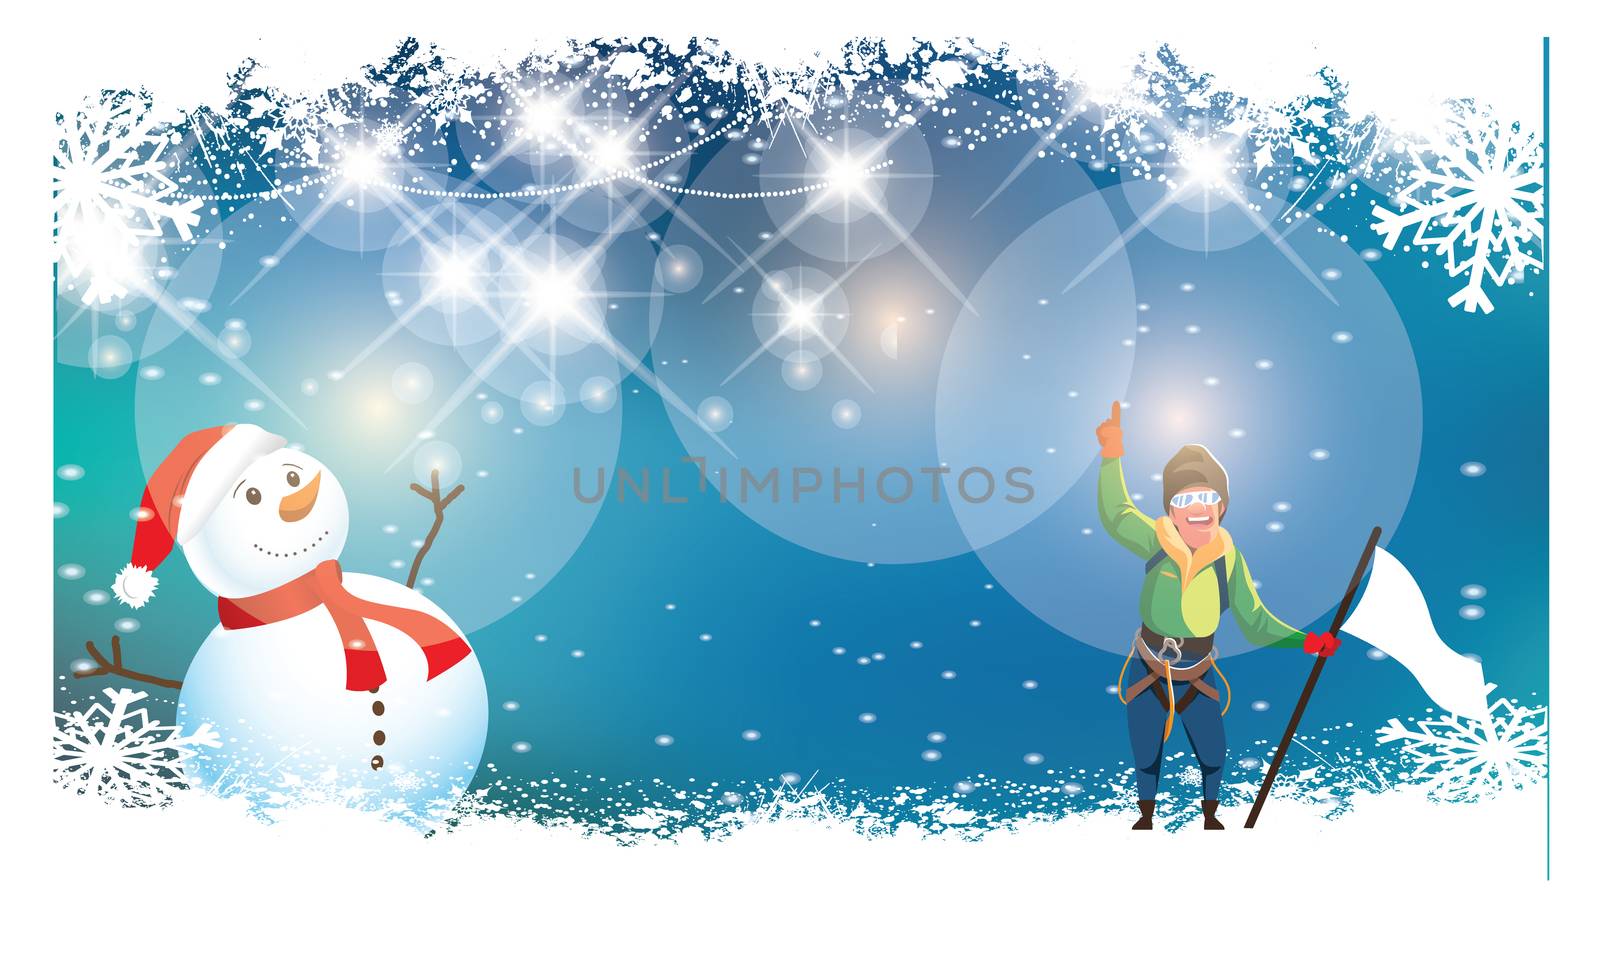 Snowman and a man in Snow by aanavcreationsplus